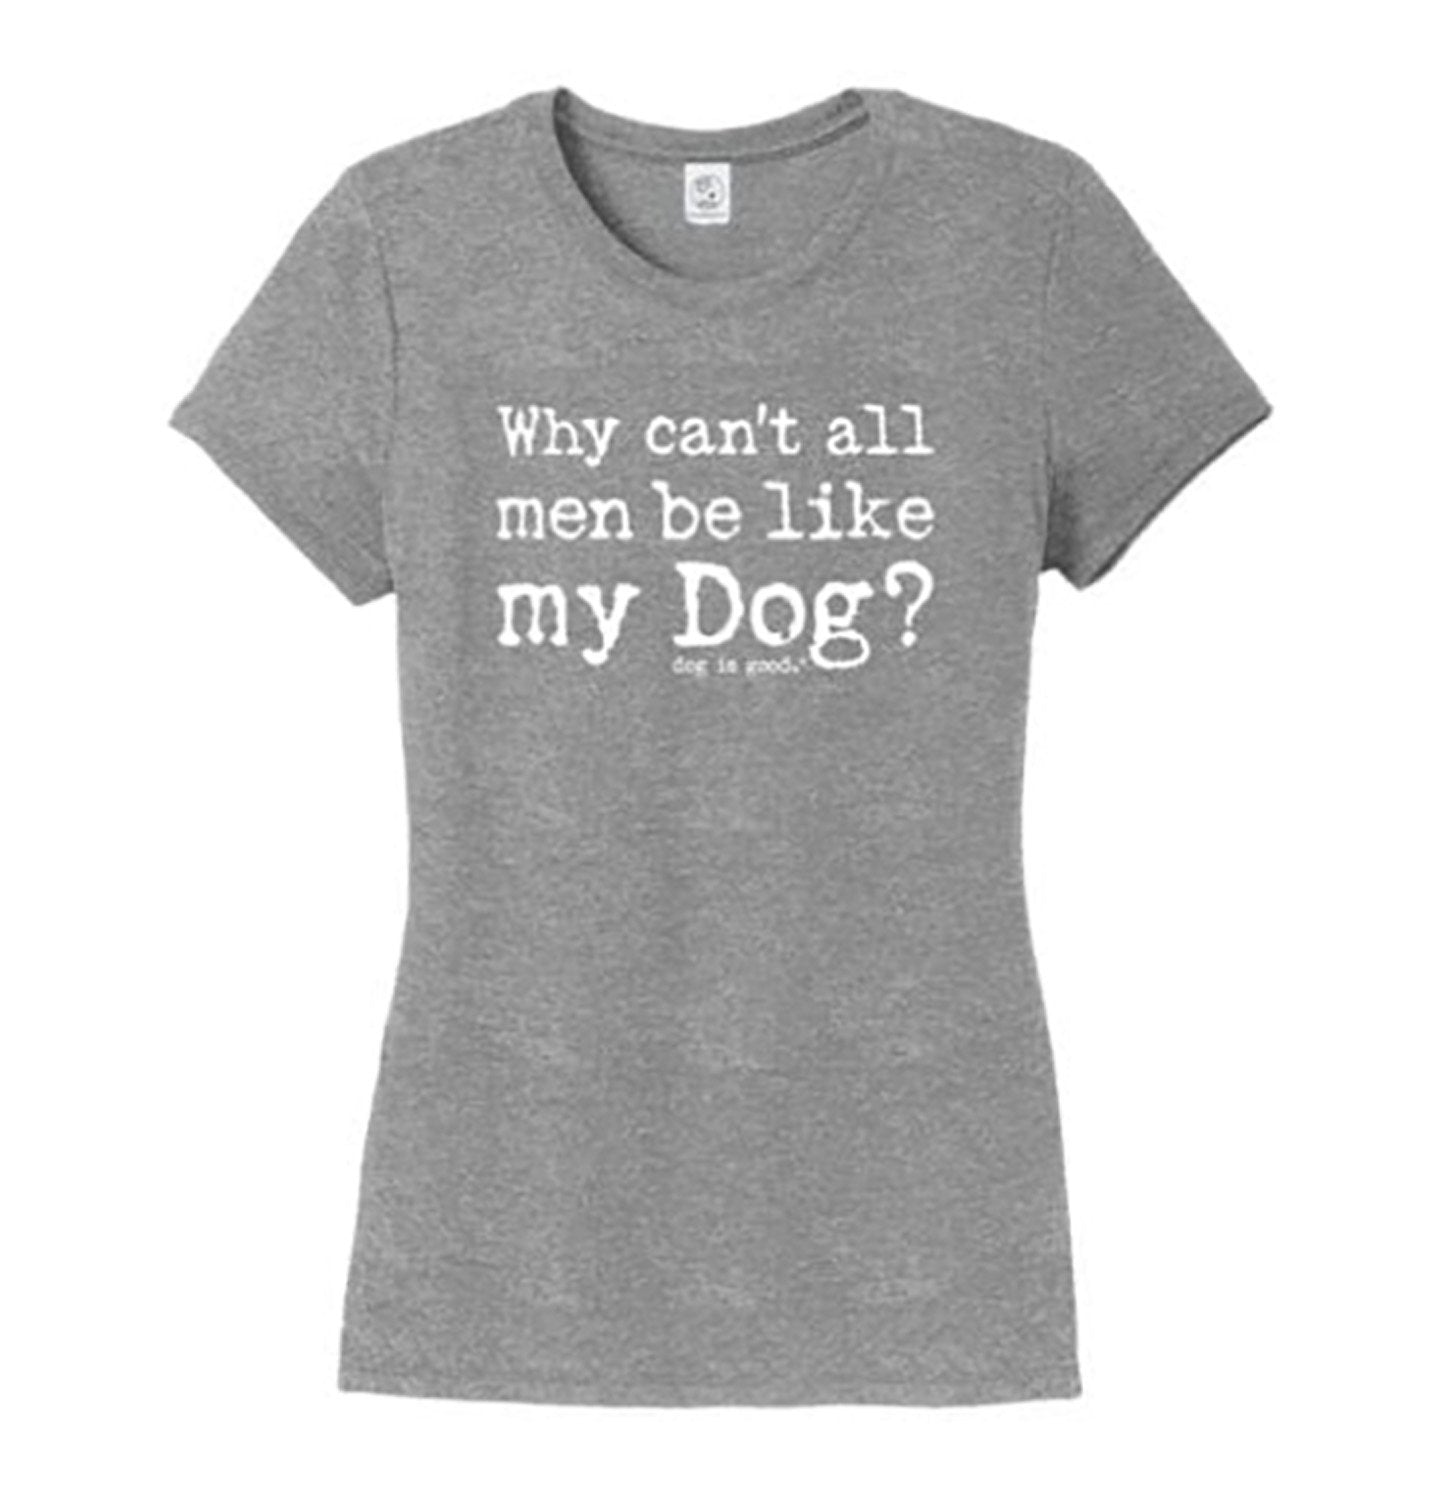 Why Can't All Men Be Like My Dog - Dog Is Good - Ladies' T-Shirt